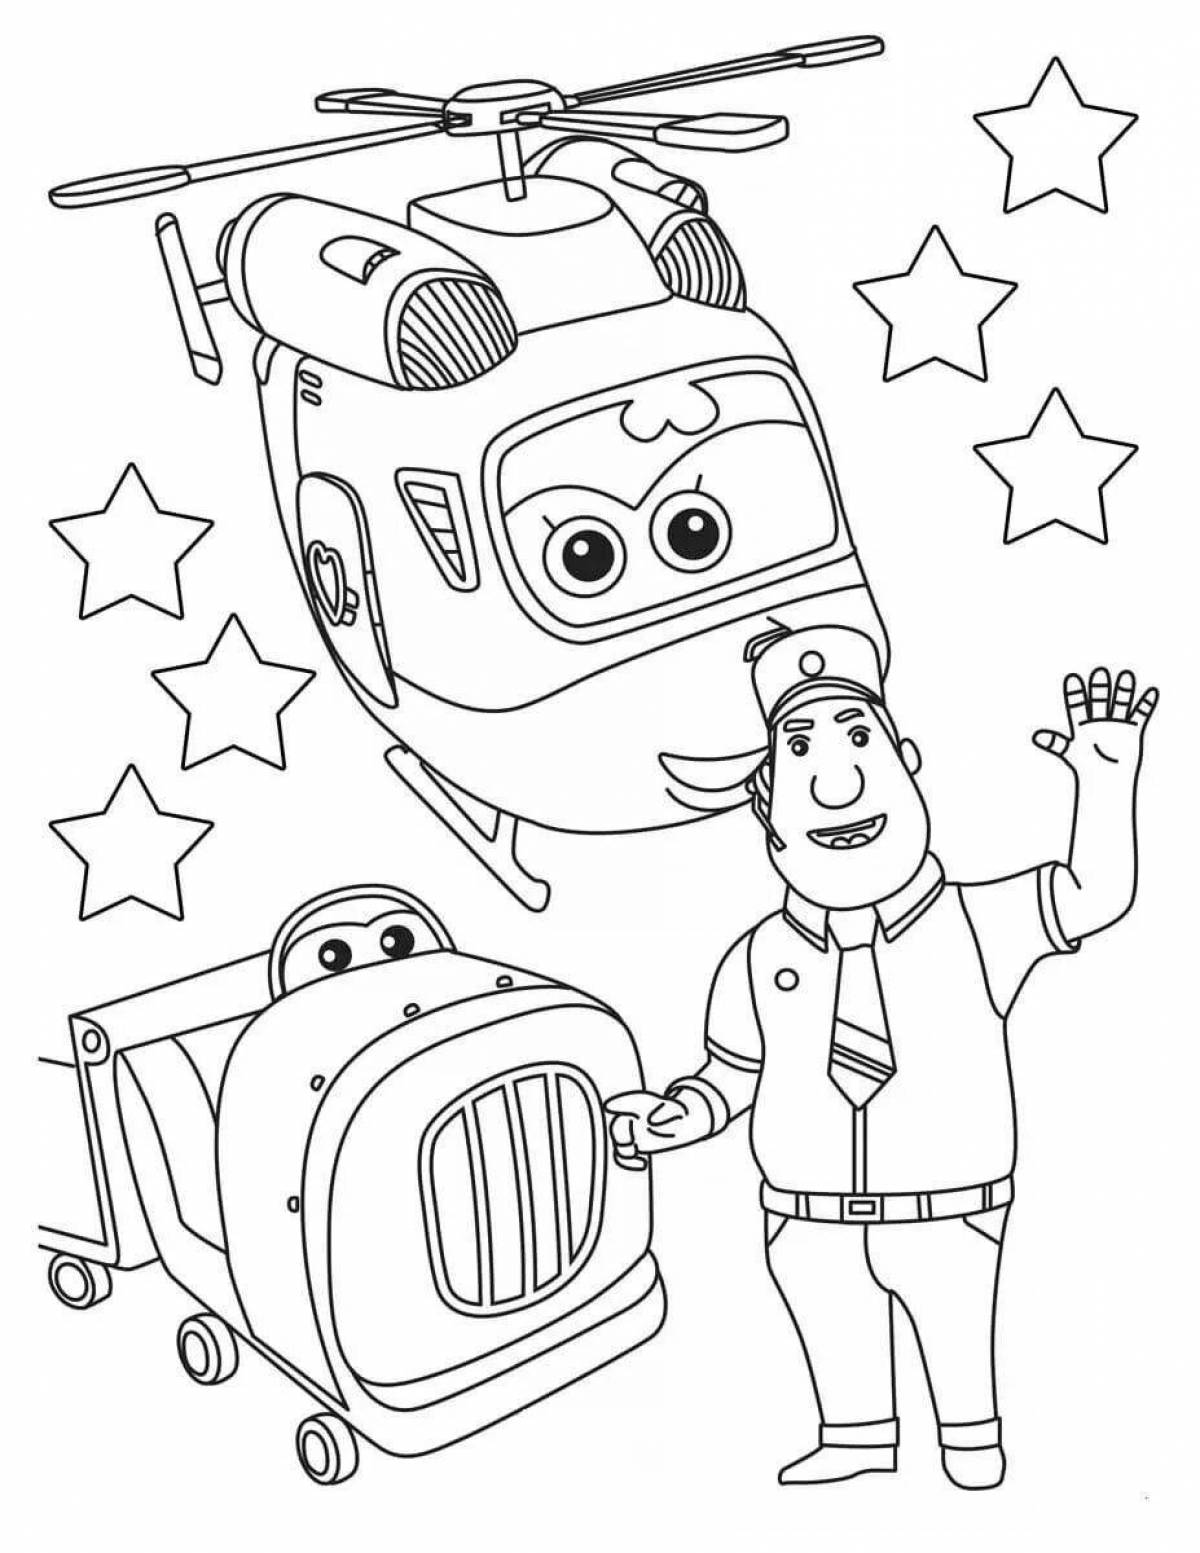 Marvelous superwings jet and friends coloring page